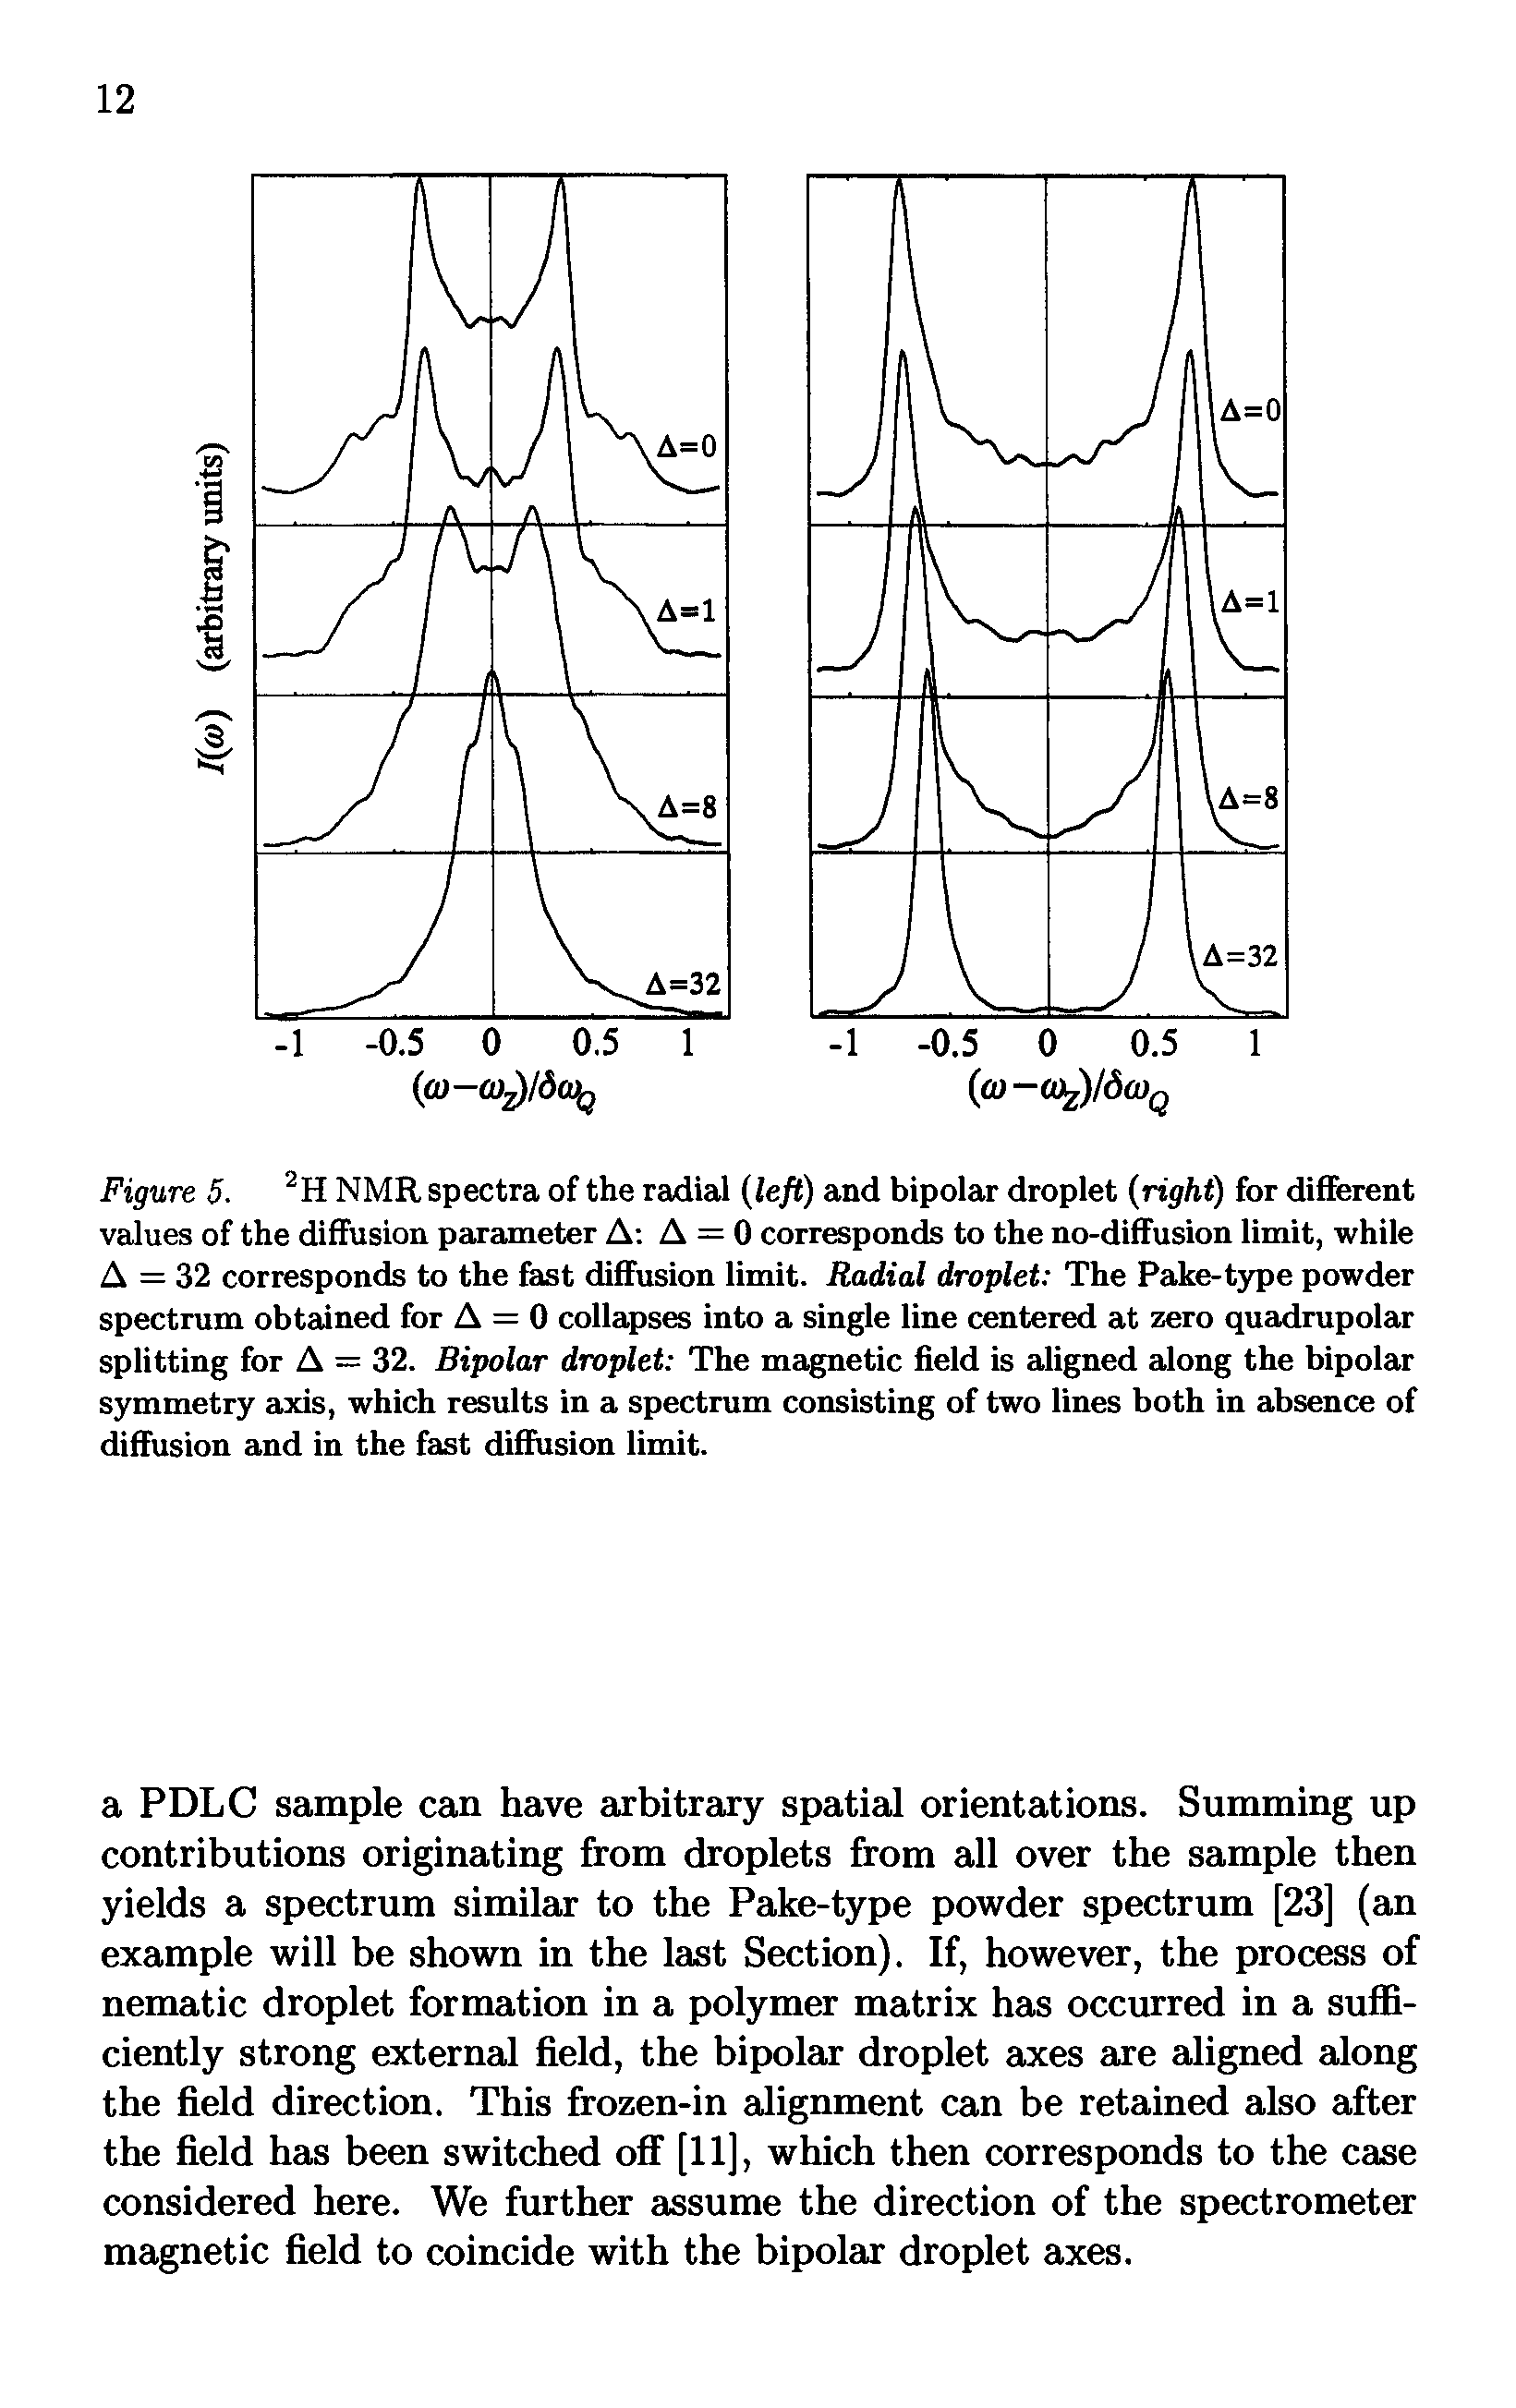 Figure 5. NMR spectra of the radial left) and bipolar droplet right) for different values of the diffusion parameter A A = 0 corresponds to the no-diffusion limit, while A = 32 corresponds to the fest diffusion limit. Radial droplet The Pake-type powder spectrum obtained for A = 0 collapses into a single line centered at zero quadrupolar splitting for A = 32. Bipolar droplet The mckgnetic field is aligned along the bipolar symmetry ajds, which results in a spectrum consisting of two lines both in absence of diffusion and in the fest diffusion limit.